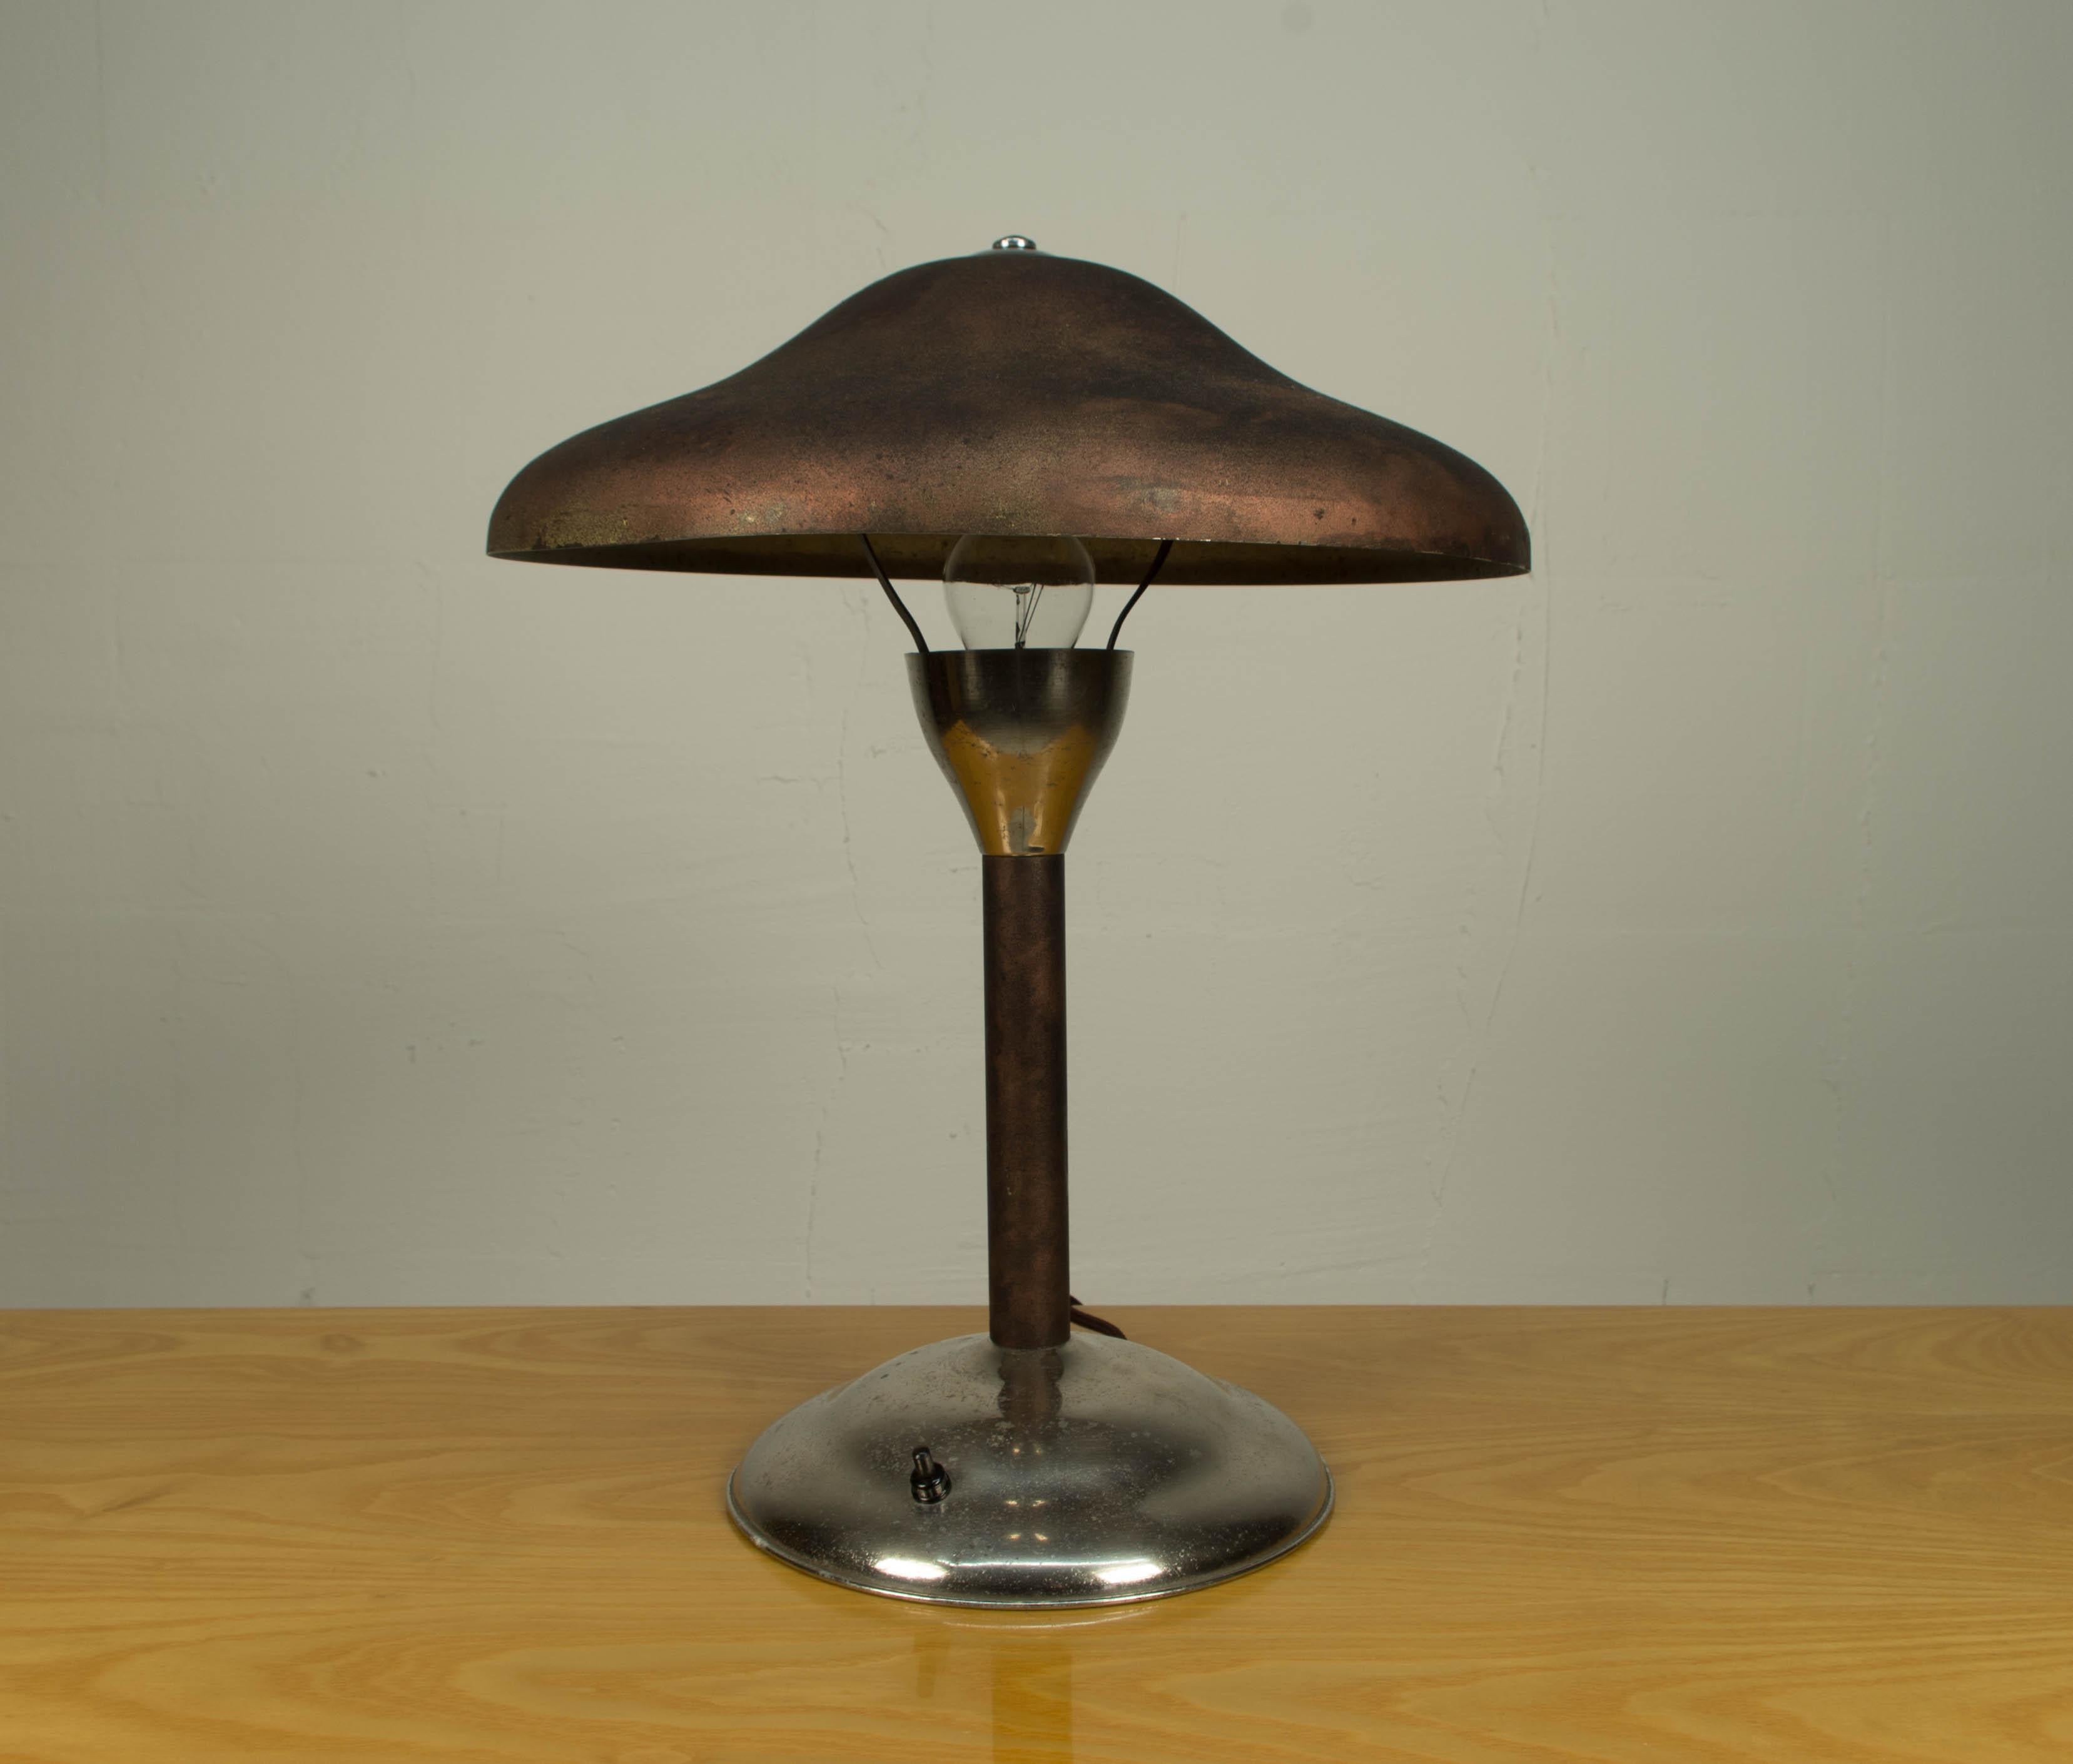 Rare table lamp designed by Frantisek Anyz for his company IAS in 1920s. Very good original condition. E26 or E27 socket.